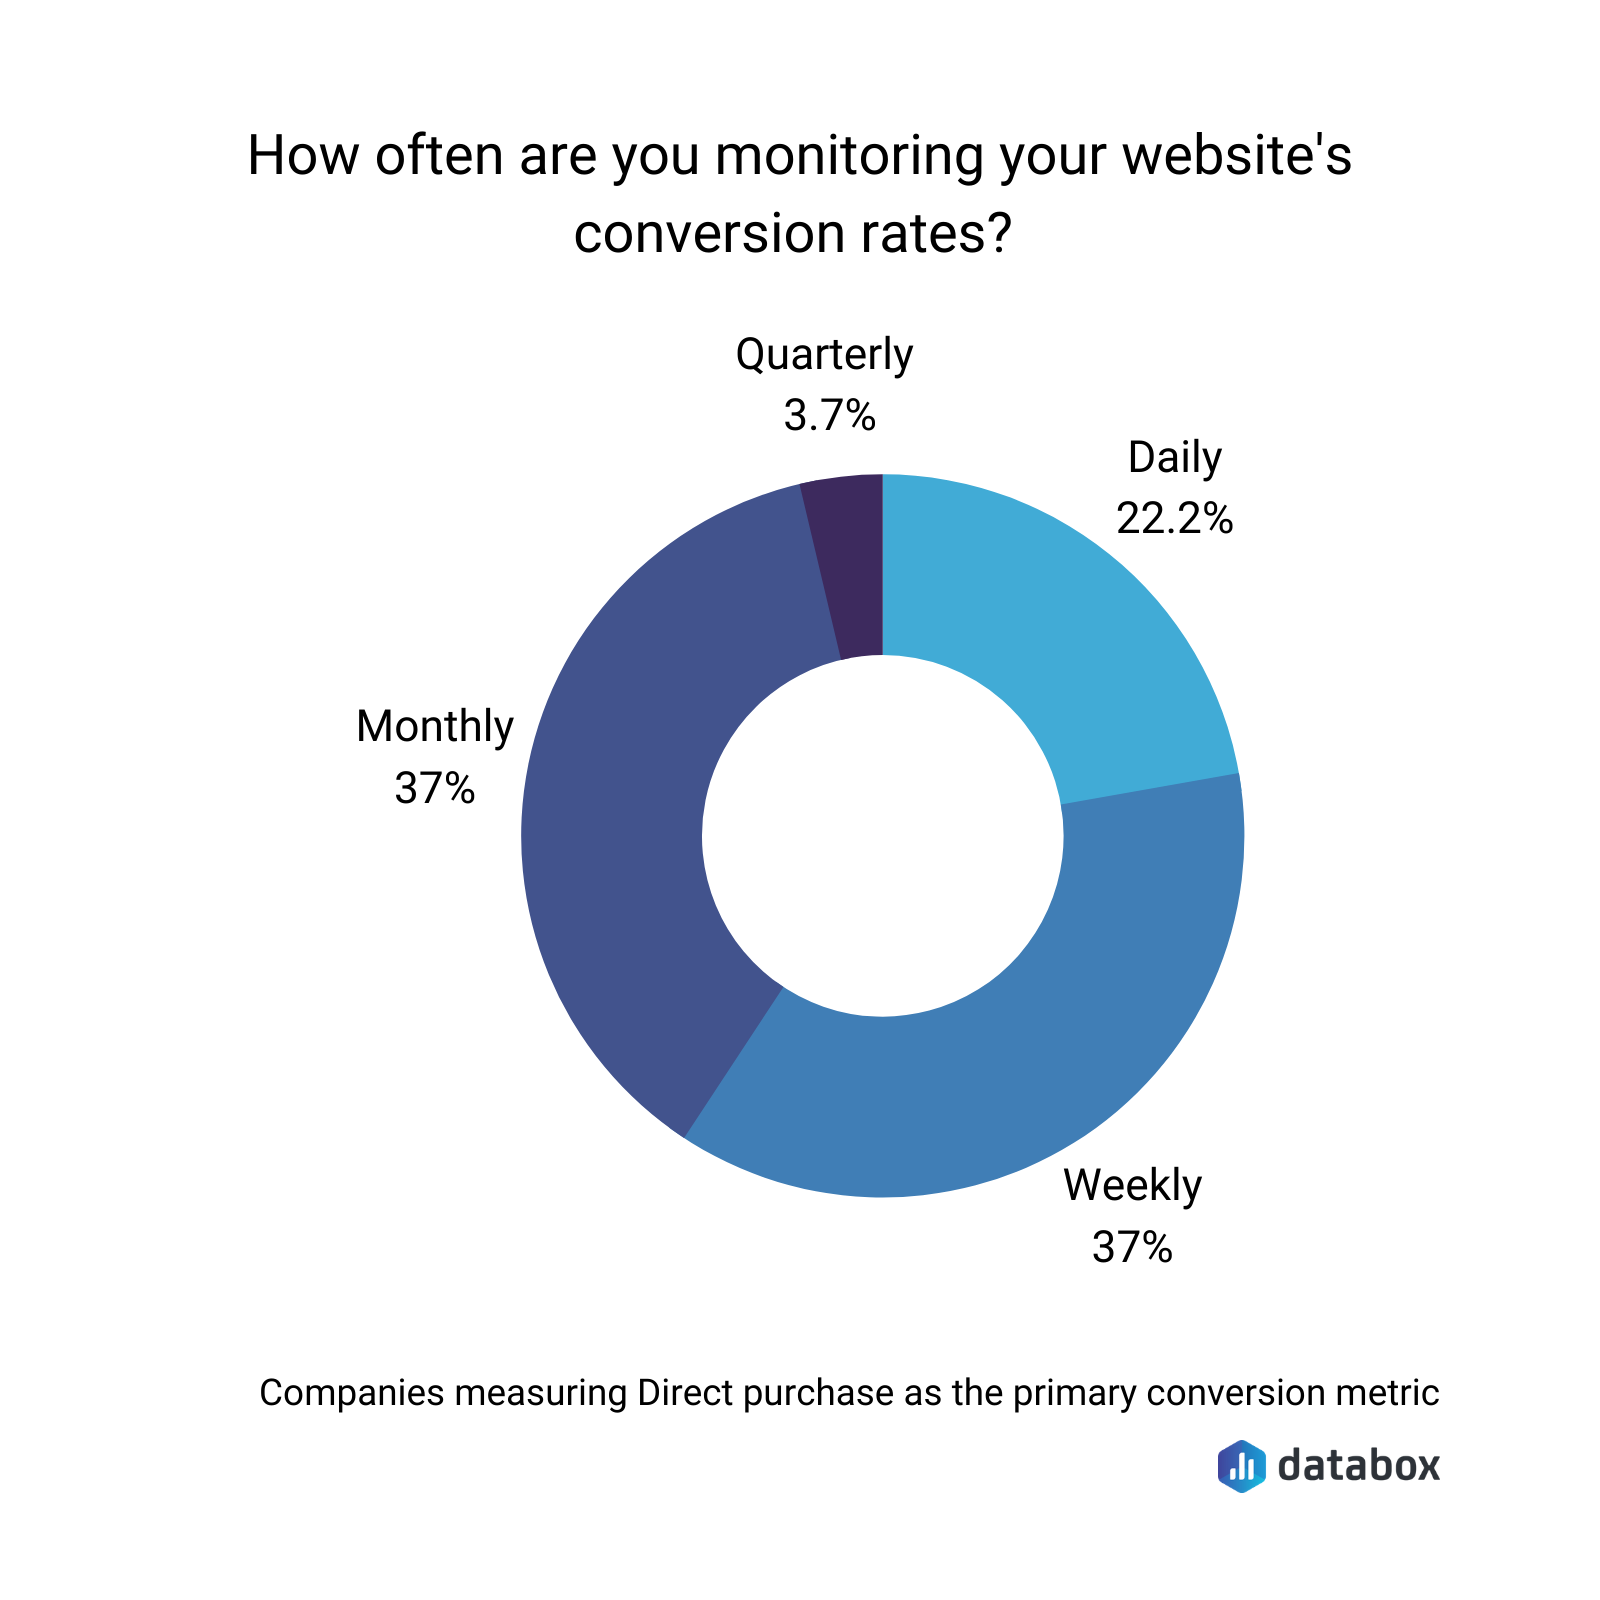 Databox survey results showing the frequency of monitoring website conversion rates